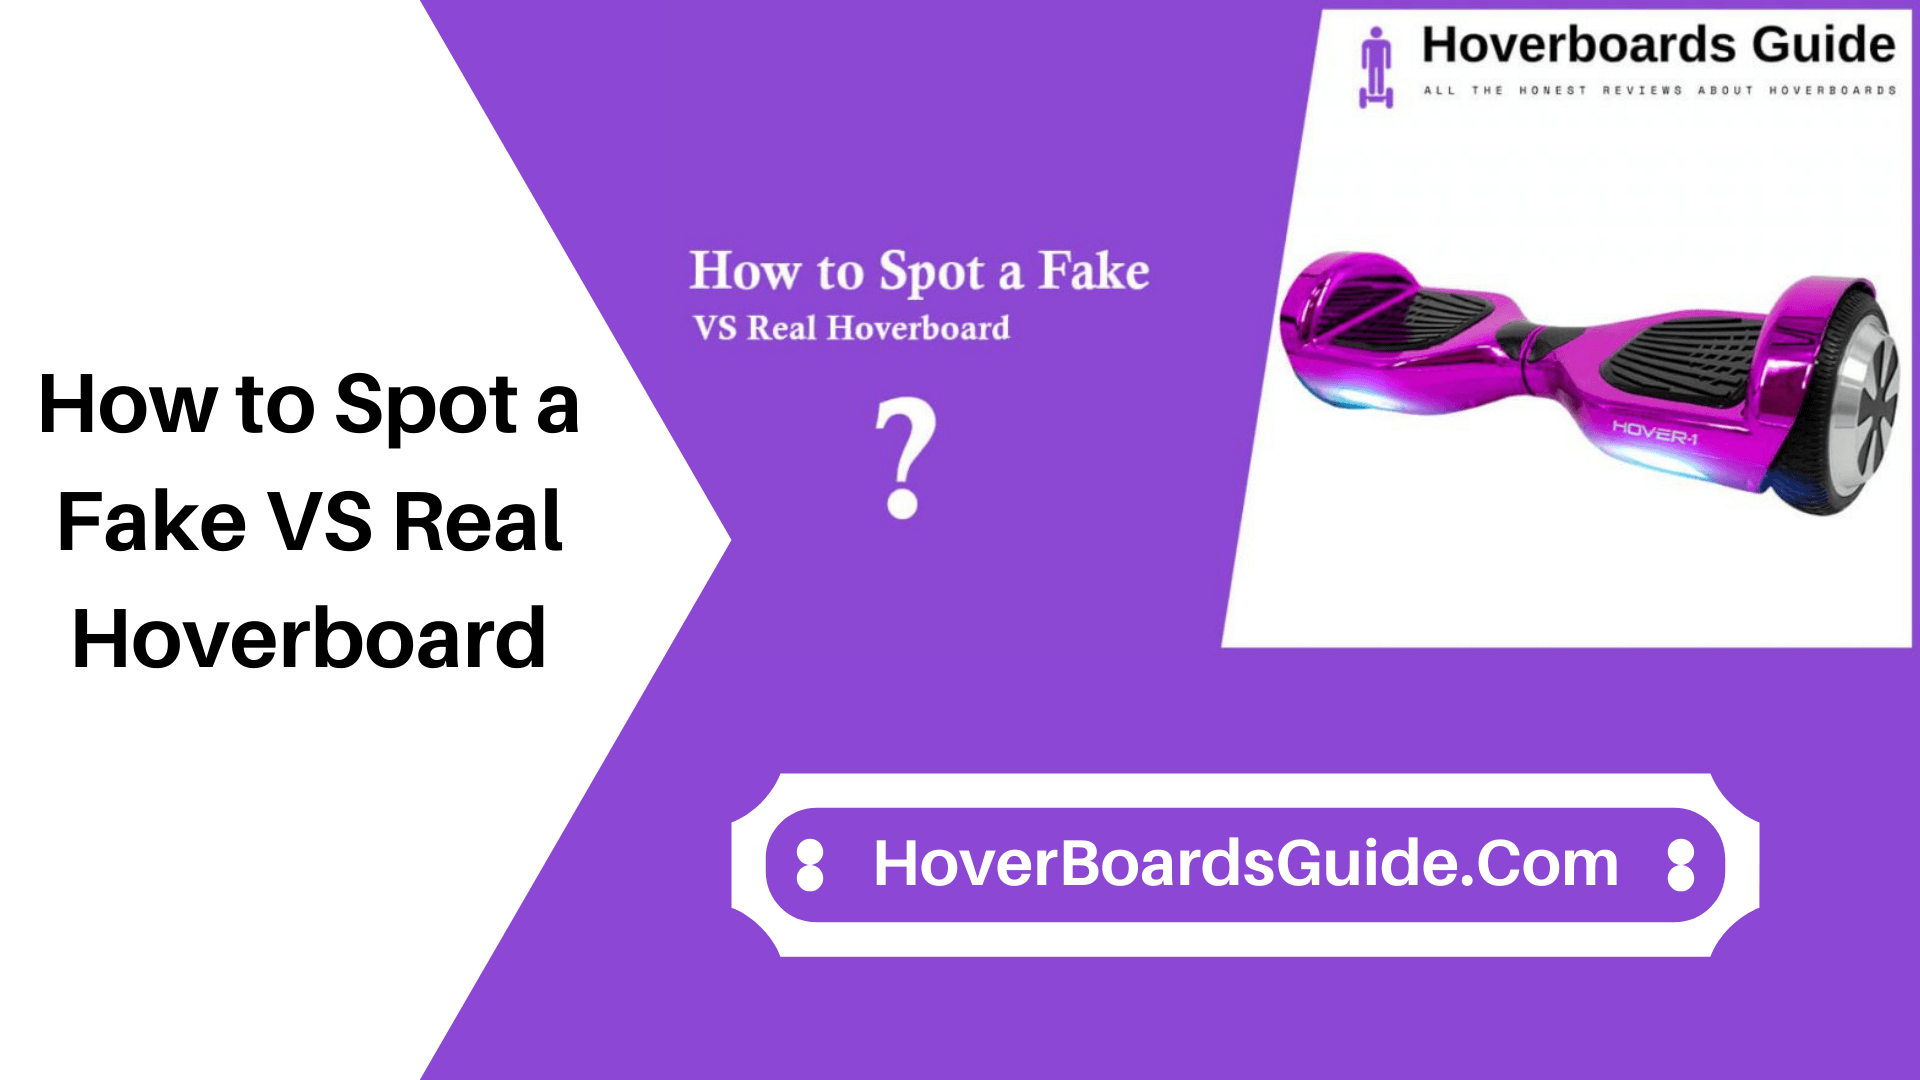 How to Spot a Fake VS Real Hoverboard